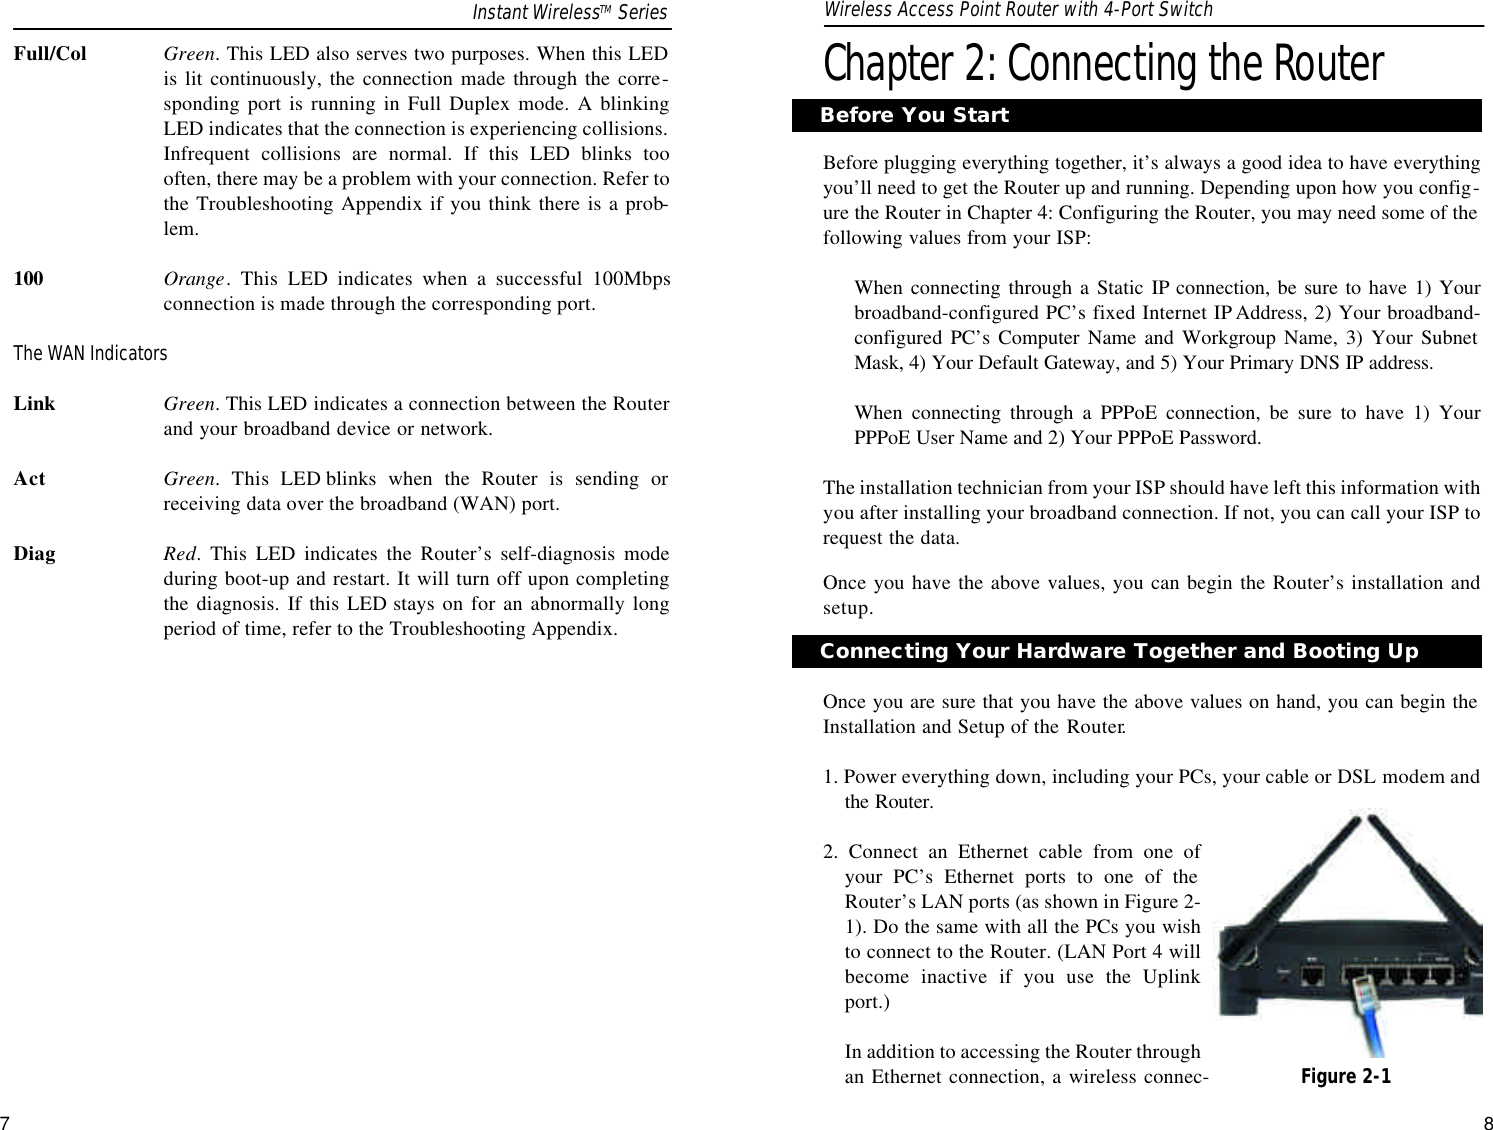 Chapter 2: Connecting the RouterBefore plugging everything together, it’s always a good idea to have everythingyou’ll need to get the Router up and running. Depending upon how you config-ure the Router in Chapter 4: Configuring the Router, you may need some of thefollowing values from your ISP:When connecting through a Static IP connection, be sure to have 1) Yourbroadband-configured PC’s fixed Internet IP Address, 2) Your broadband-configured PC’s Computer Name and Workgroup Name, 3) Your SubnetMask, 4) Your Default Gateway, and 5) Your Primary DNS IP address.When connecting through a PPPoE connection, be sure to have 1) YourPPPoE User Name and 2) Your PPPoE Password.The installation technician from your ISP should have left this information withyou after installing your broadband connection. If not, you can call your ISP torequest the data.Once you have the above values, you can begin the Router’s installation andsetup.Once you are sure that you have the above values on hand, you can begin theInstallation and Setup of the Router.1. Power everything down, including your PCs, your cable or DSL modem andthe Router.2. Connect an Ethernet cable from one ofyour PC’s Ethernet ports to one of theRouter’s LAN ports (as shown in Figure 2-1). Do the same with all the PCs you wishto connect to the Router. (LAN Port 4 willbecome inactive if you use the Uplinkport.)In addition to accessing the Router throughan Ethernet connection, a wireless connec-Before You StartFull/Col Green. This LED also serves two purposes. When this LEDis lit continuously, the connection made through the corre-sponding port is running in Full Duplex mode. A blinkingLED indicates that the connection is experiencing collisions.Infrequent collisions are normal. If this LED blinks toooften, there may be a problem with your connection. Refer tothe Troubleshooting Appendix if you think there is a prob-lem.100 Orange. This LED indicates when a successful 100Mbpsconnection is made through the corresponding port.The WAN IndicatorsLink Green. This LED indicates a connection between the Routerand your broadband device or network.Act Green. This LED blinks when the Router is sending orreceiving data over the broadband (WAN) port.Diag Red. This LED indicates the Router’s self-diagnosis modeduring boot-up and restart. It will turn off upon completingthe diagnosis. If this LED stays on for an abnormally longperiod of time, refer to the Troubleshooting Appendix.7Connecting Your Hardware Together and Booting UpFigure 2-1Instant WirelessTM Series Wireless Access Point Router with 4-Port Switch8